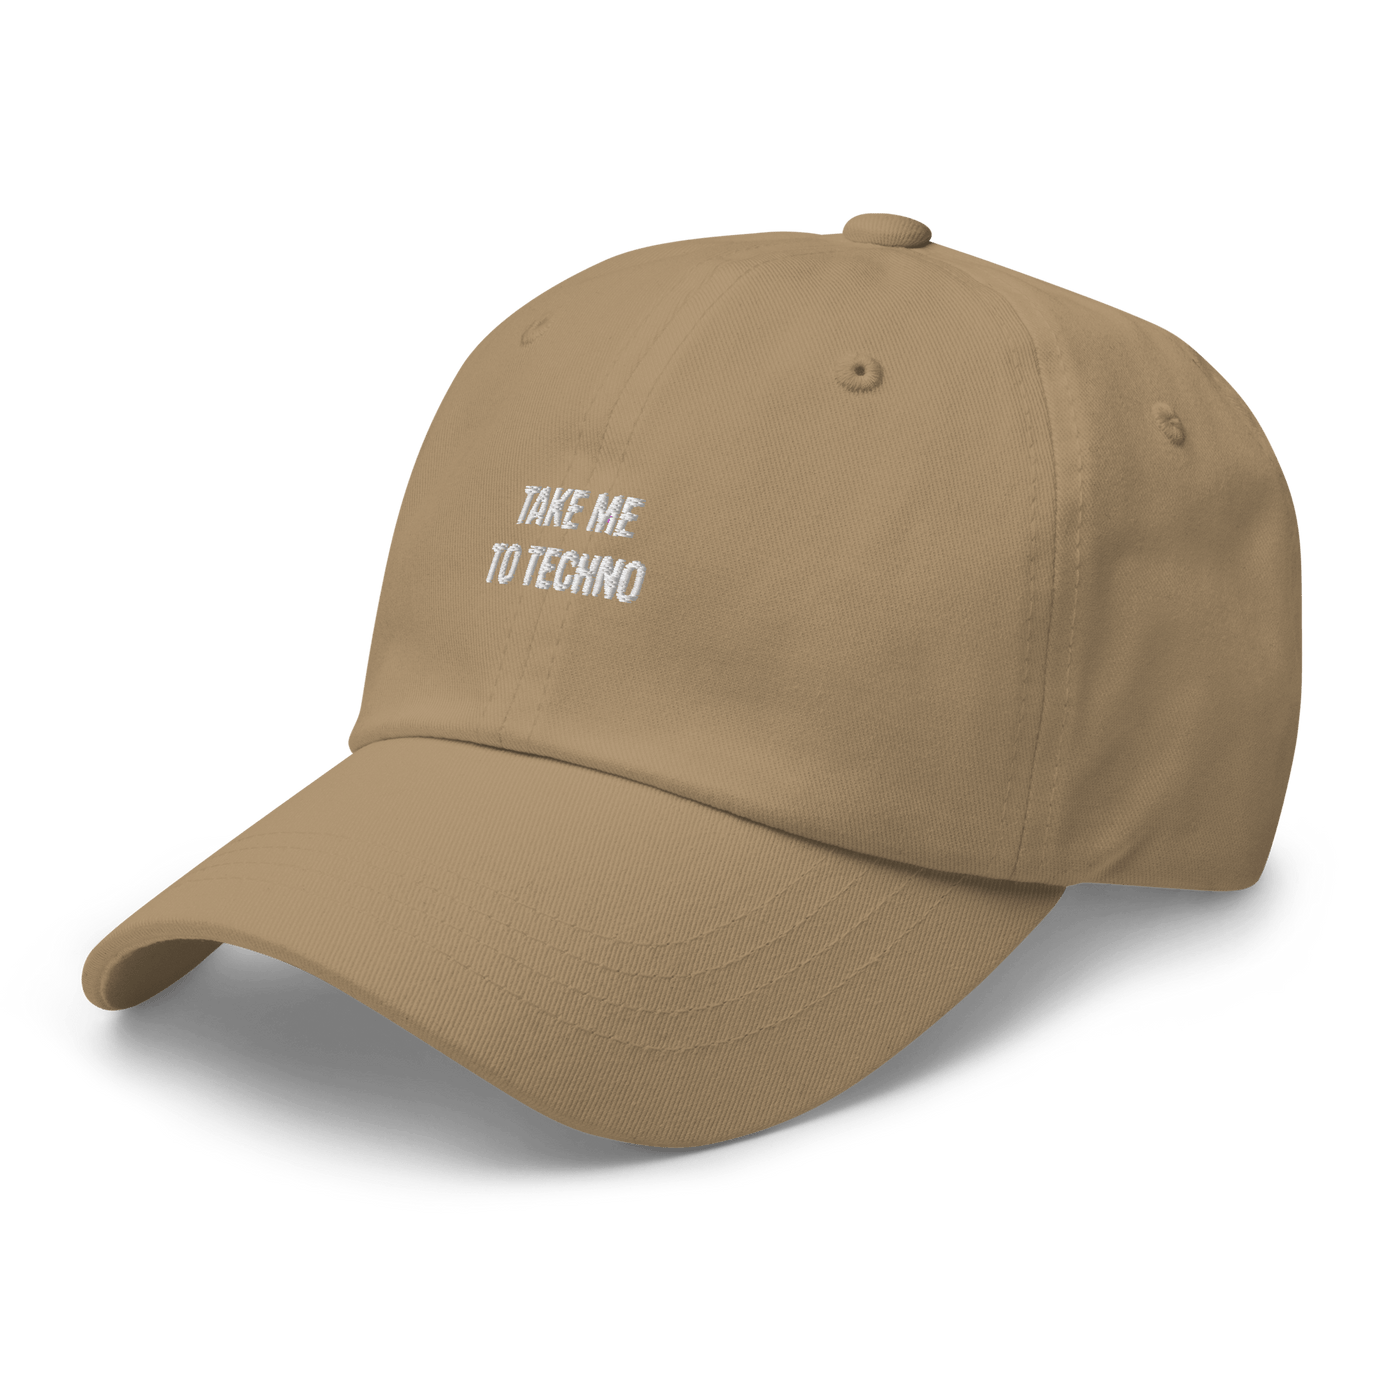 Take me to techno Dad Hat - Khaki - - Just Another Cap Store